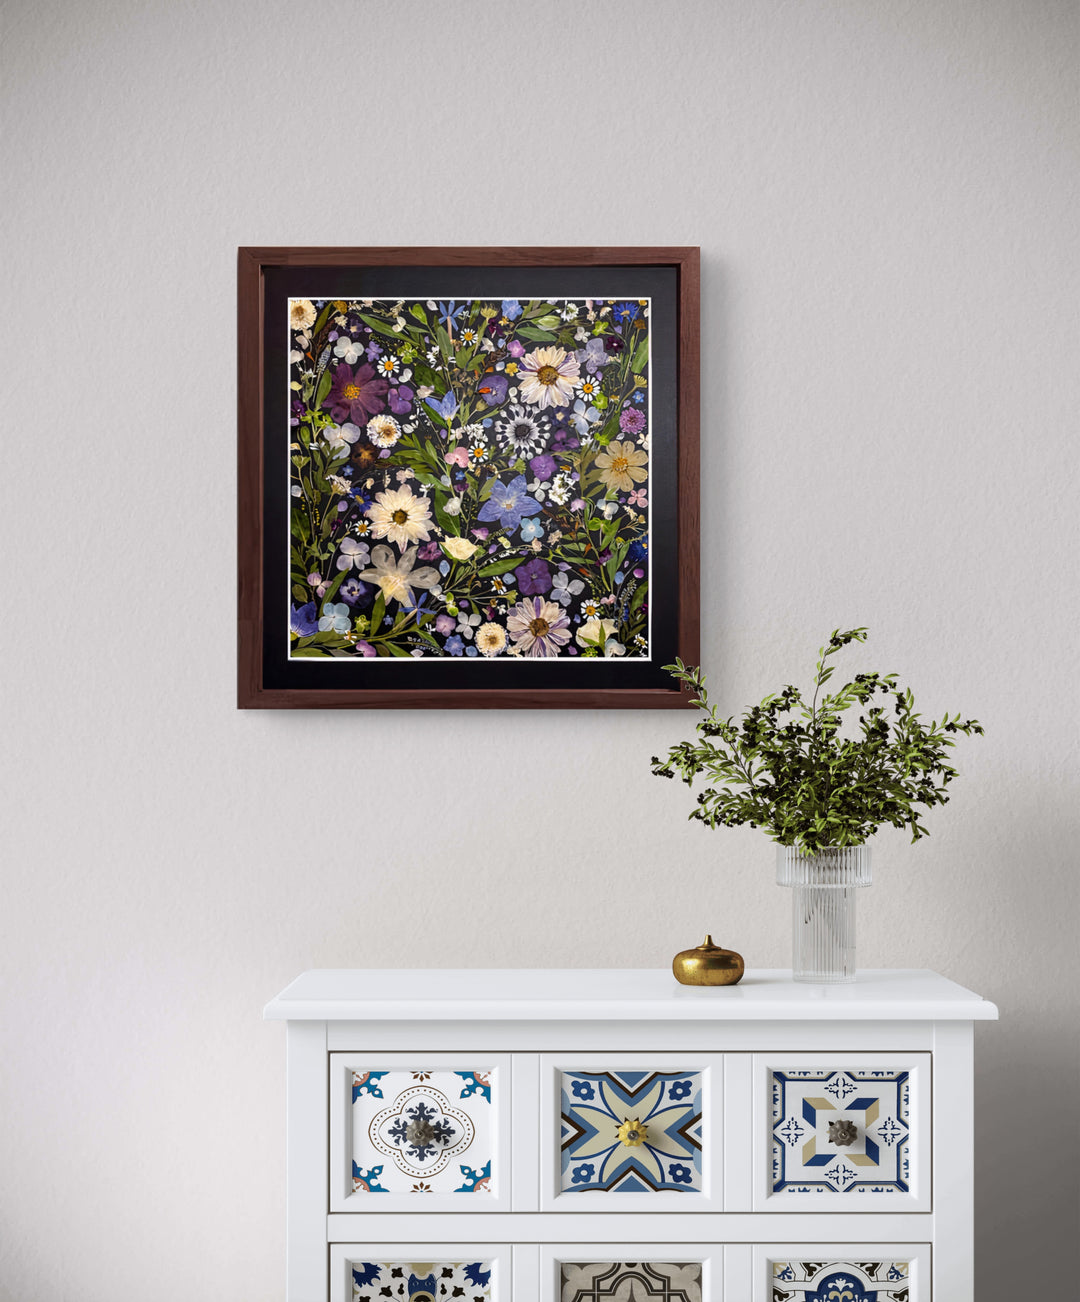 black background pressed flower frame art with flower petals hanging on the living room wall above white desk